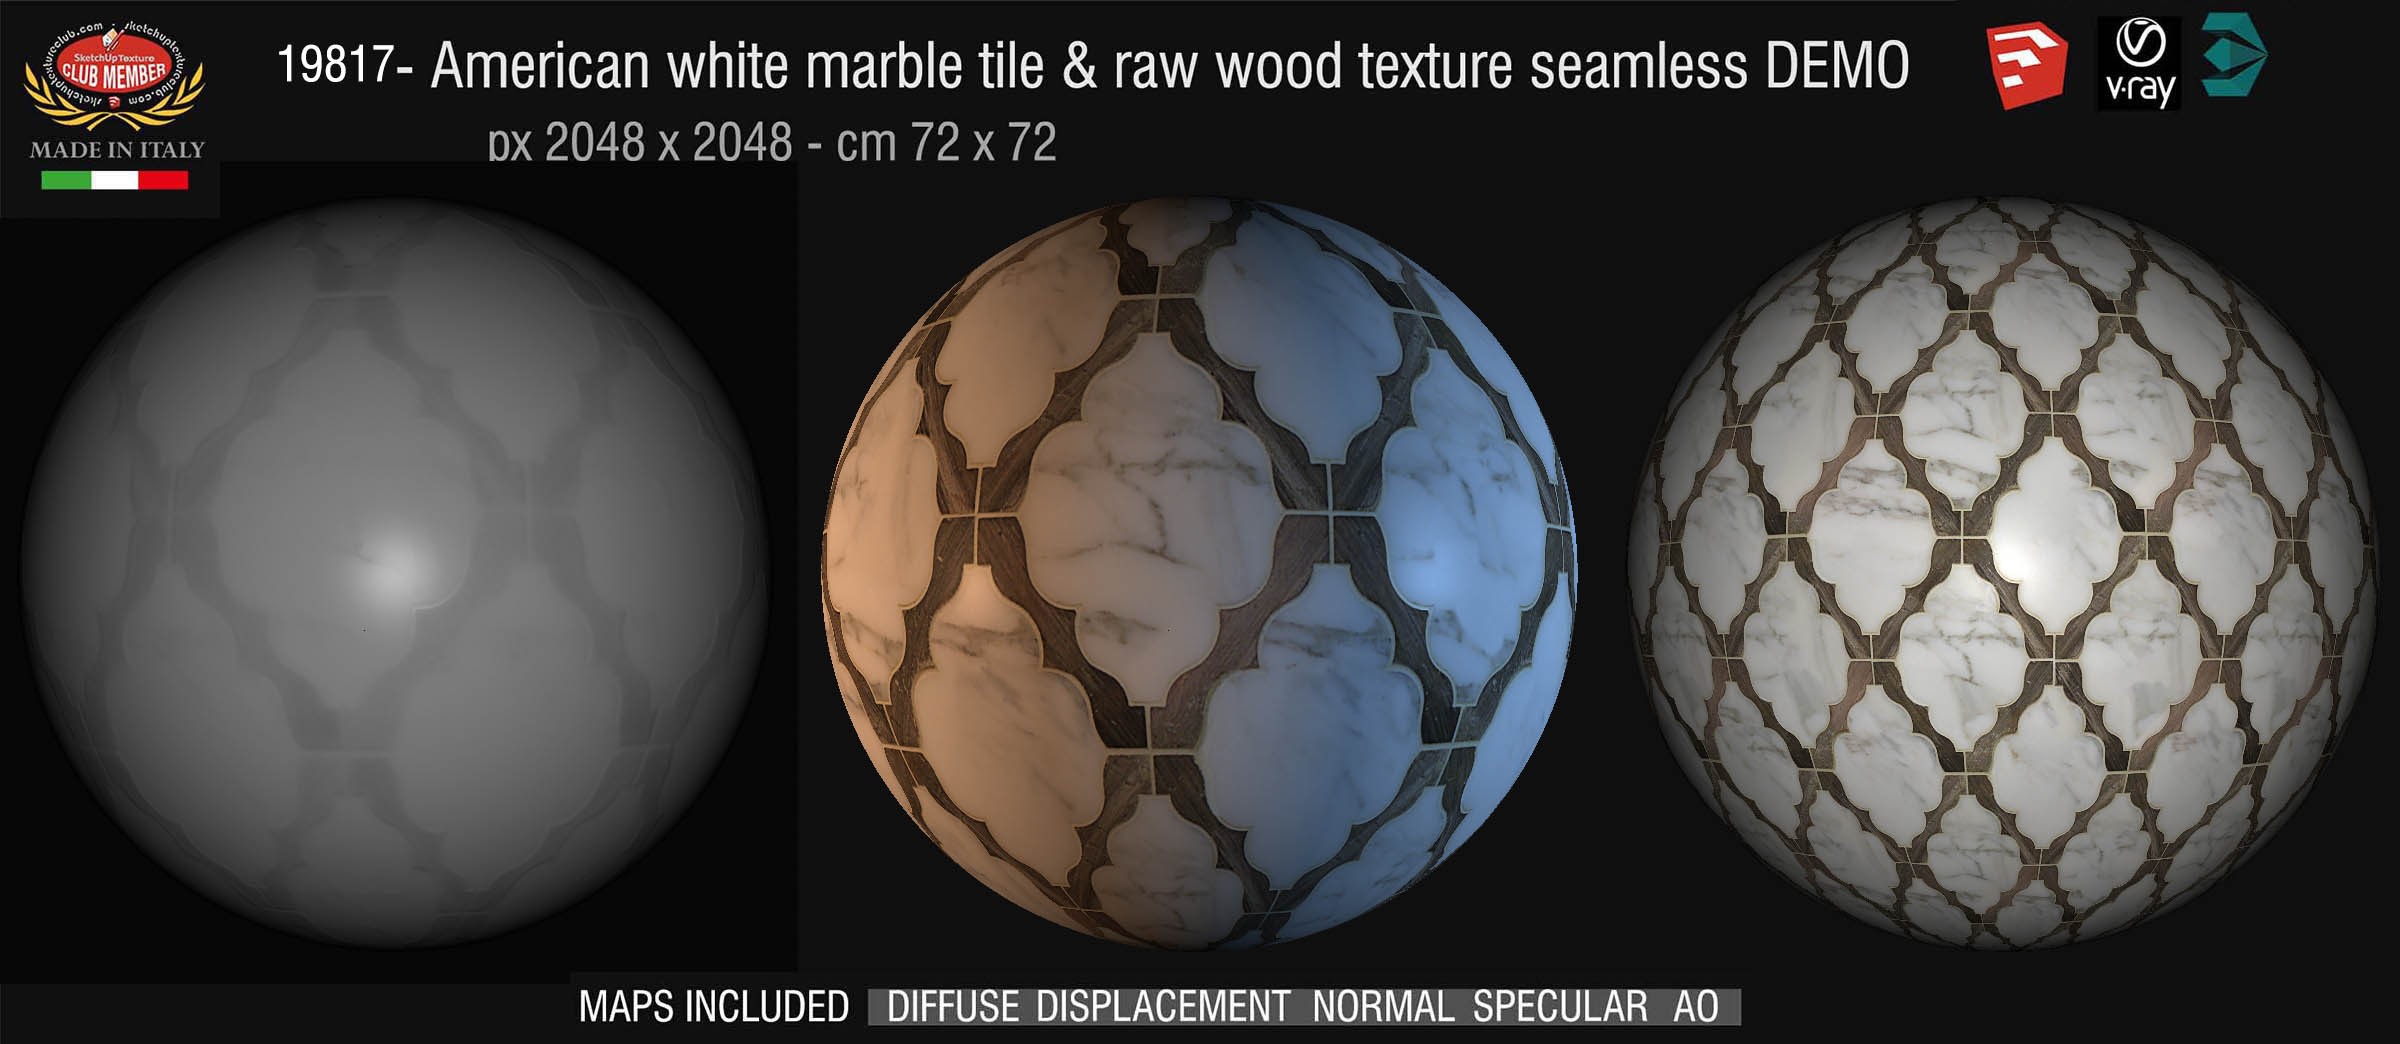 19817 American white marble tile whit raw wood texture seamless + maps DEMO